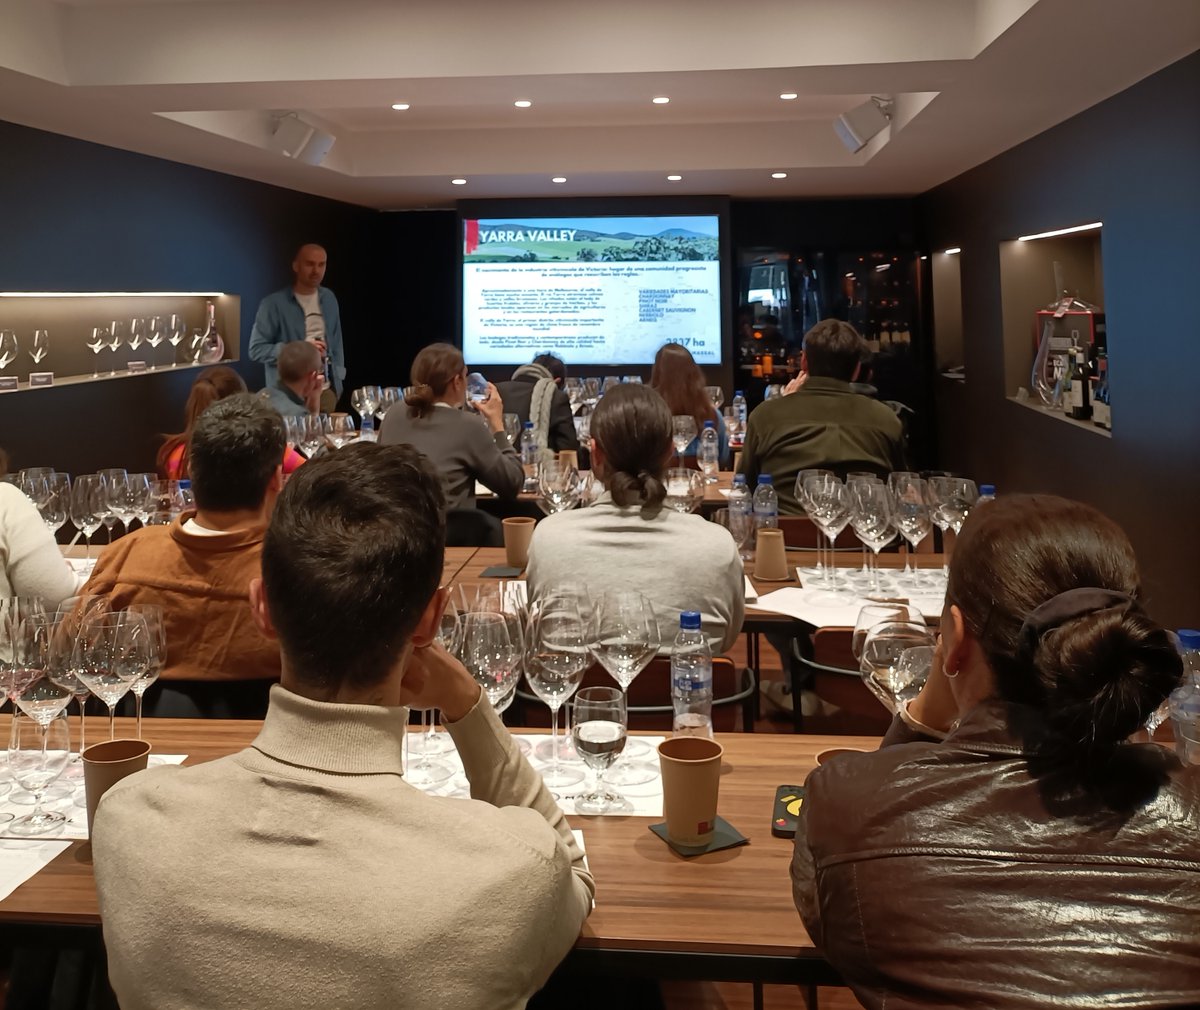 Big thanks to Álvaro Ribalta MW for running an Australian wine masterclass in Barcelona this month. Find out more about Australian Wine Discovered on pulse.ly/aafmtqmpeg #aussiewine #australianwinediscovered